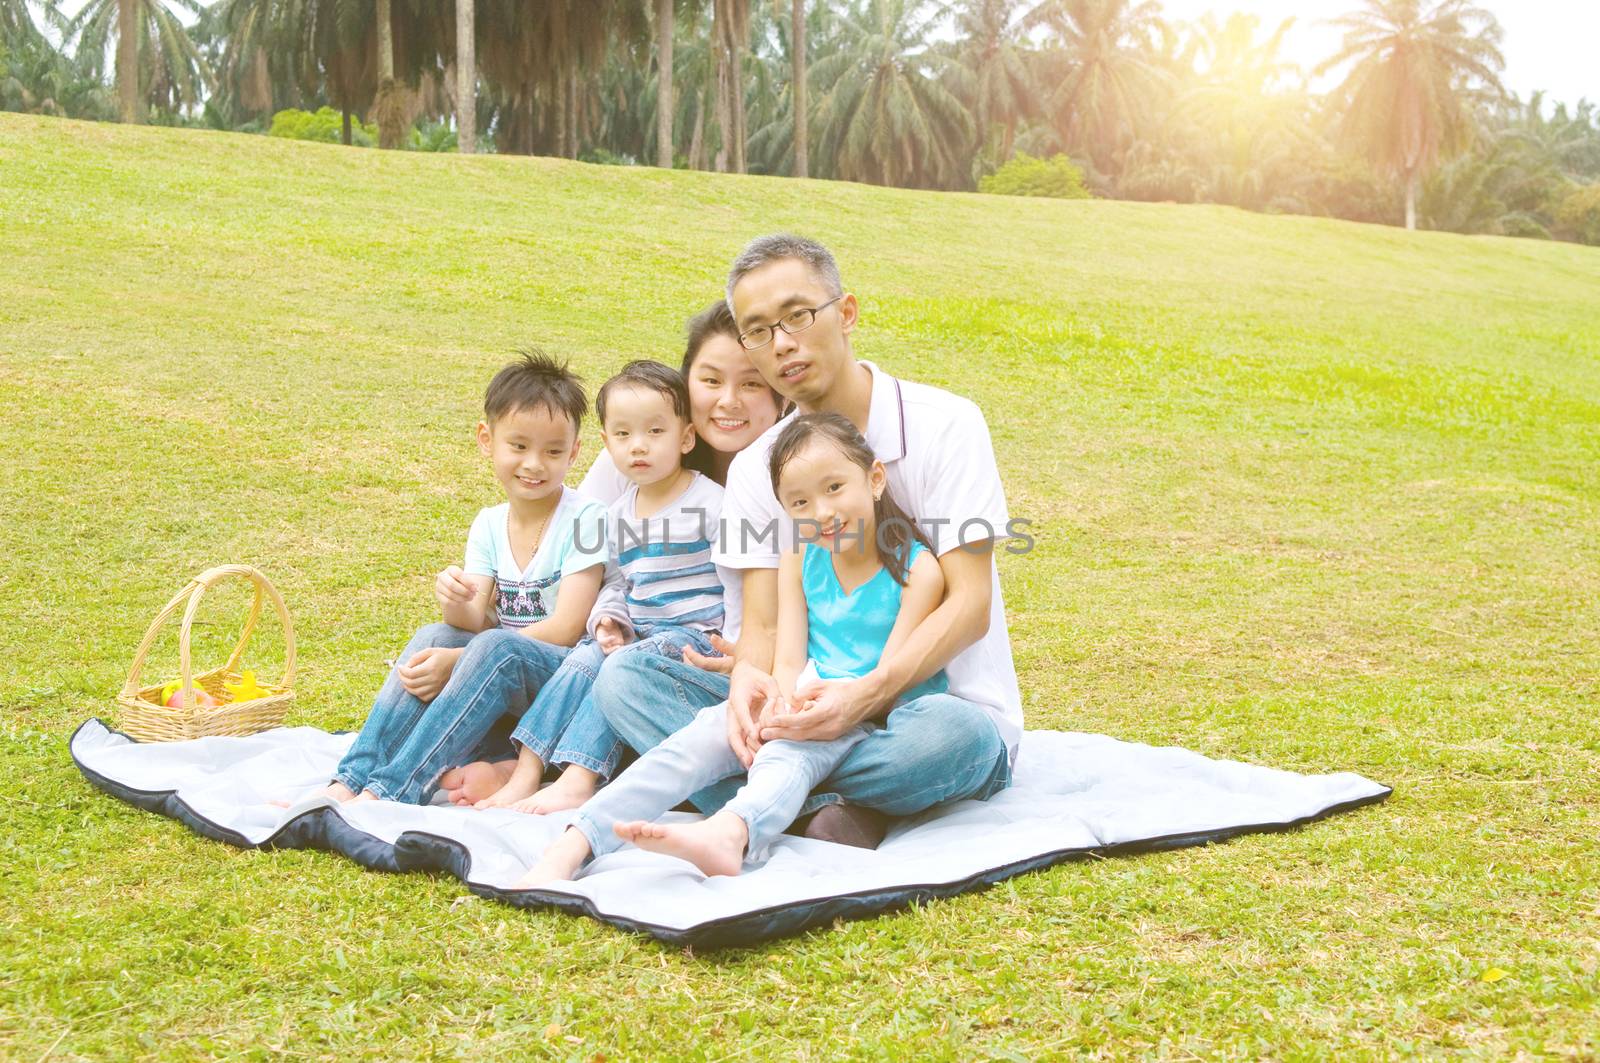 Outdoor portrait of asian family